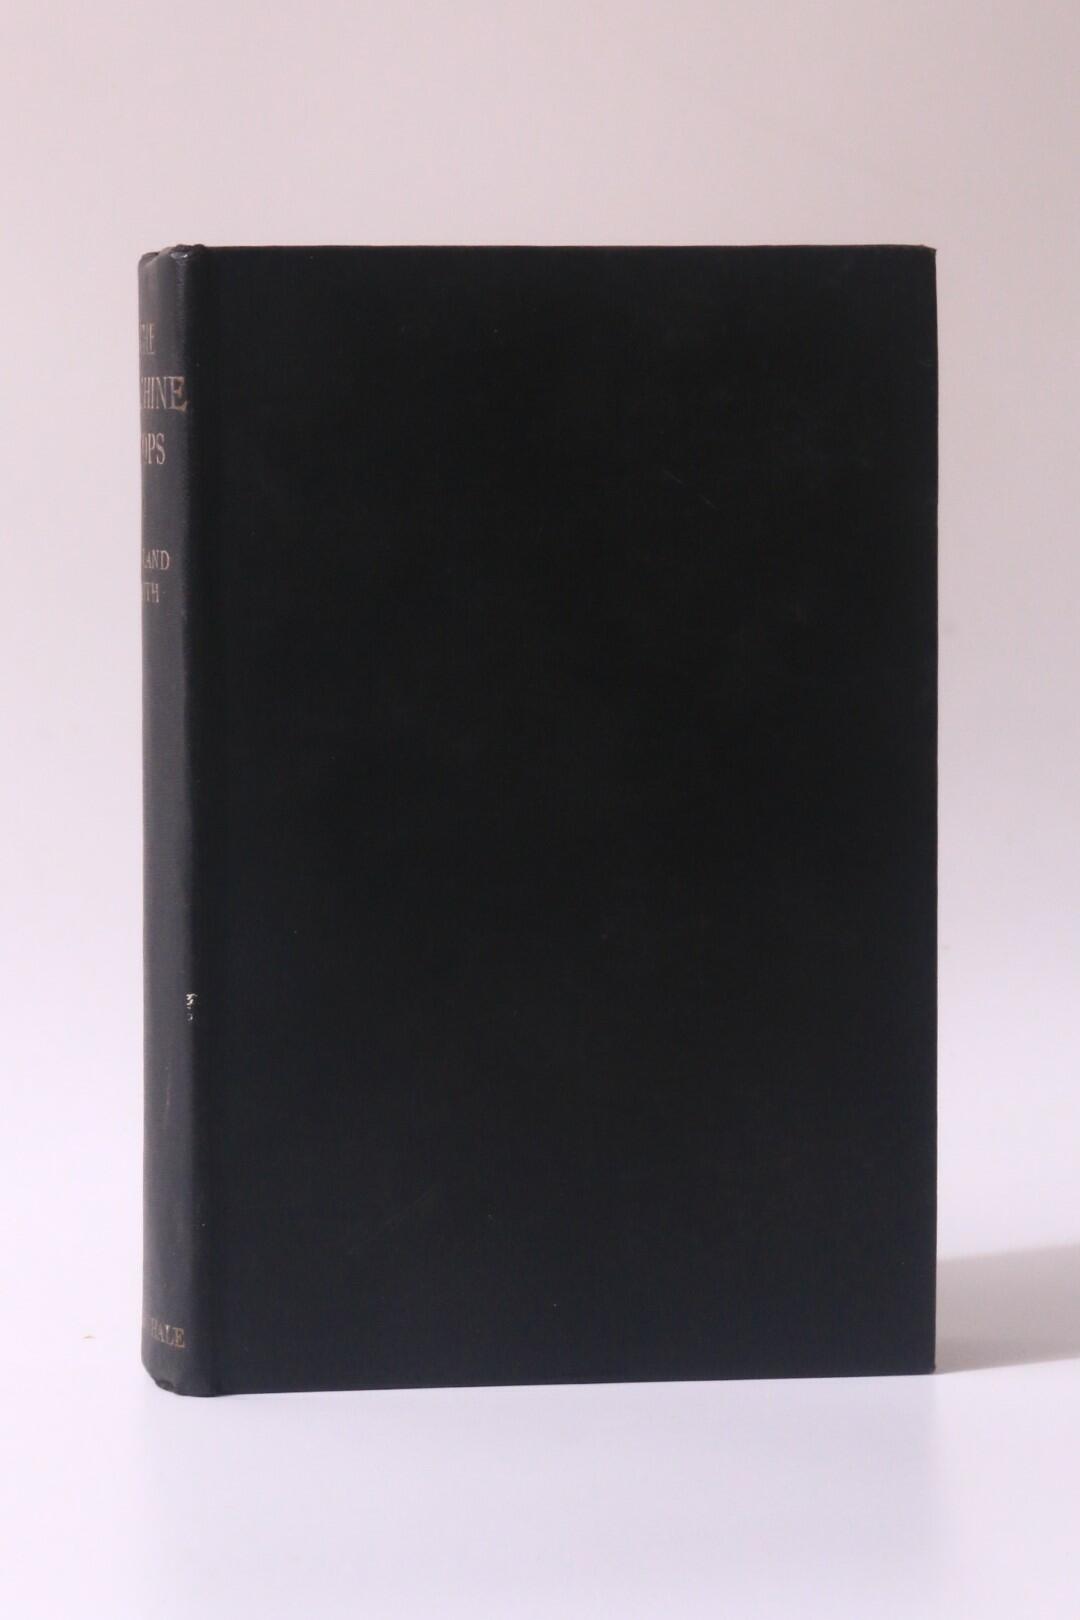 Wayland Smith - The Machine Stops - Robert Hale, 1936, First Edition.